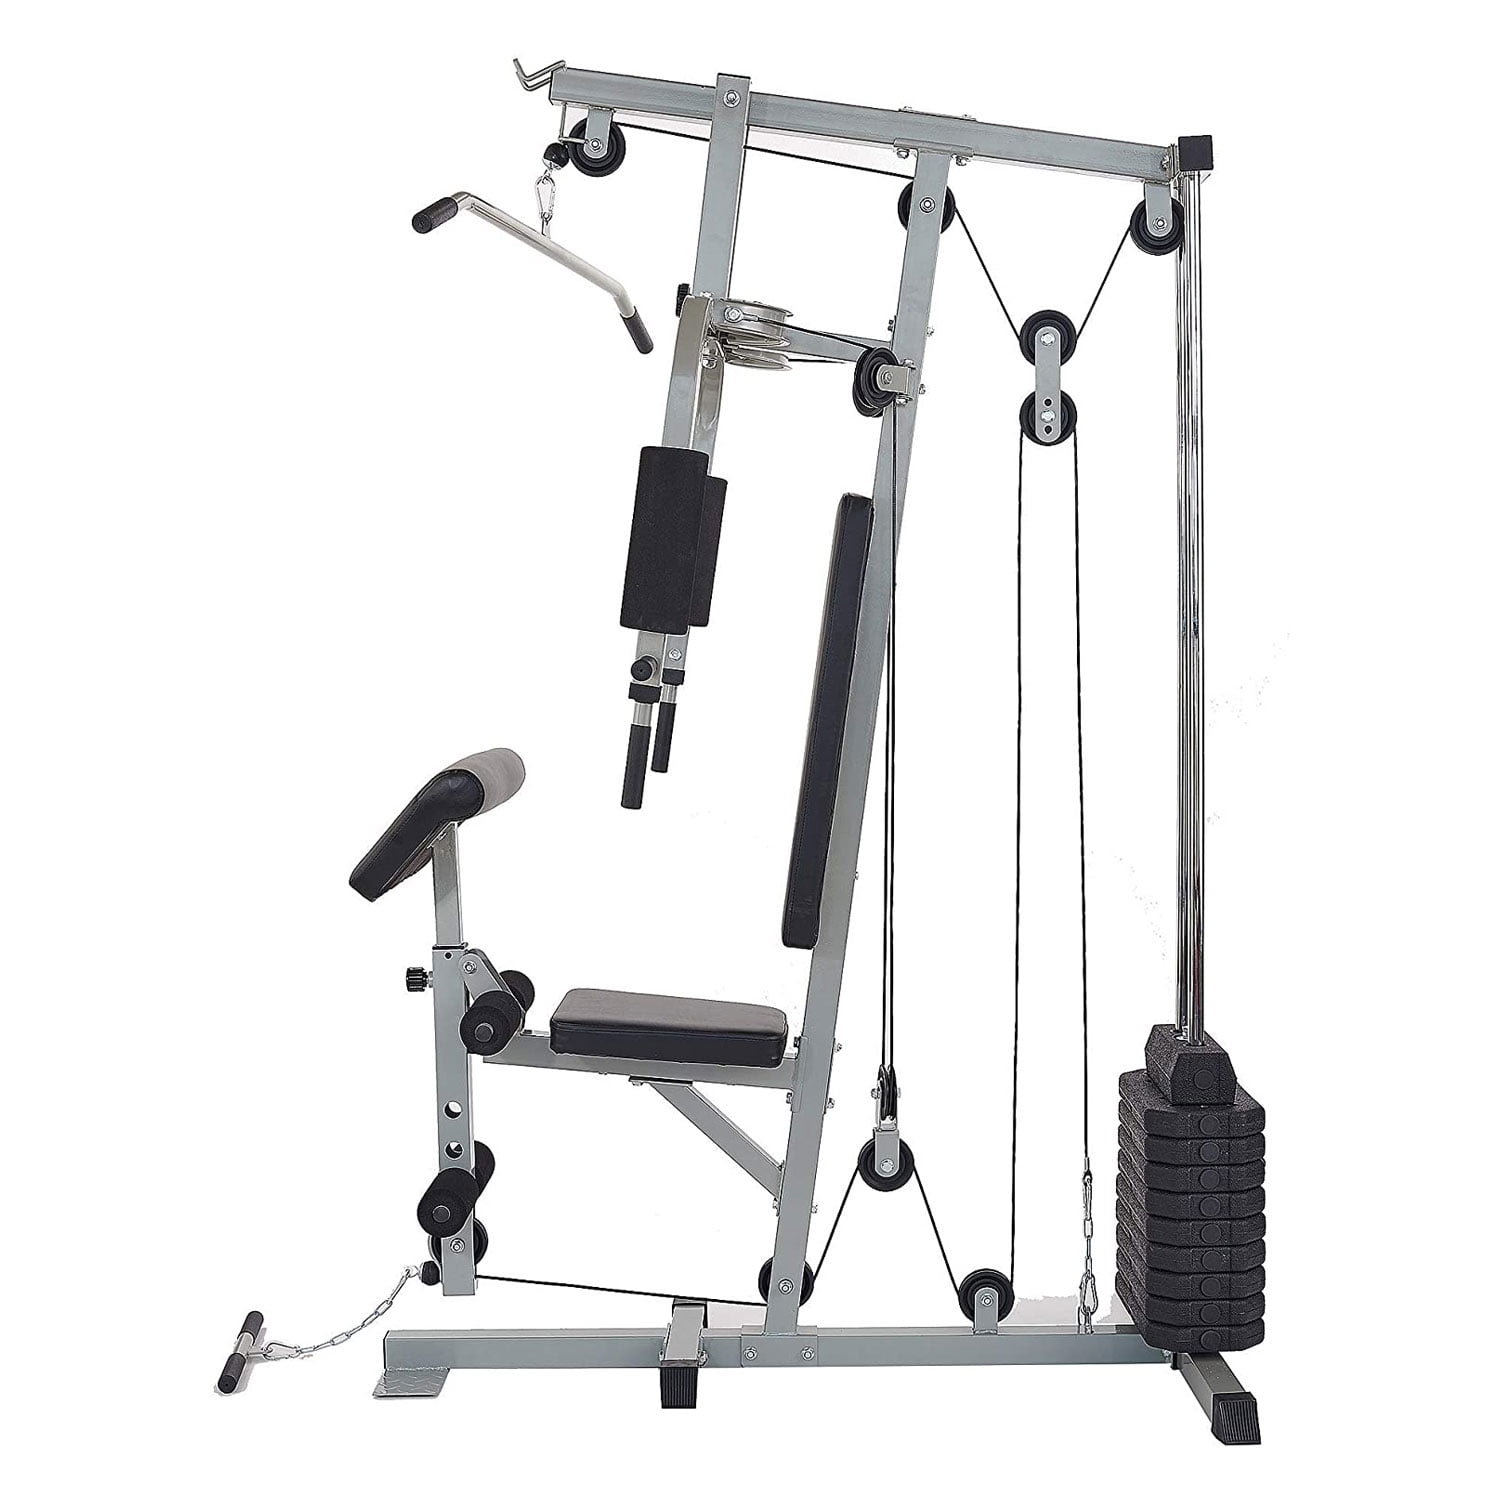 Everyday Essentials Home Gym Exercise Equipment Bench